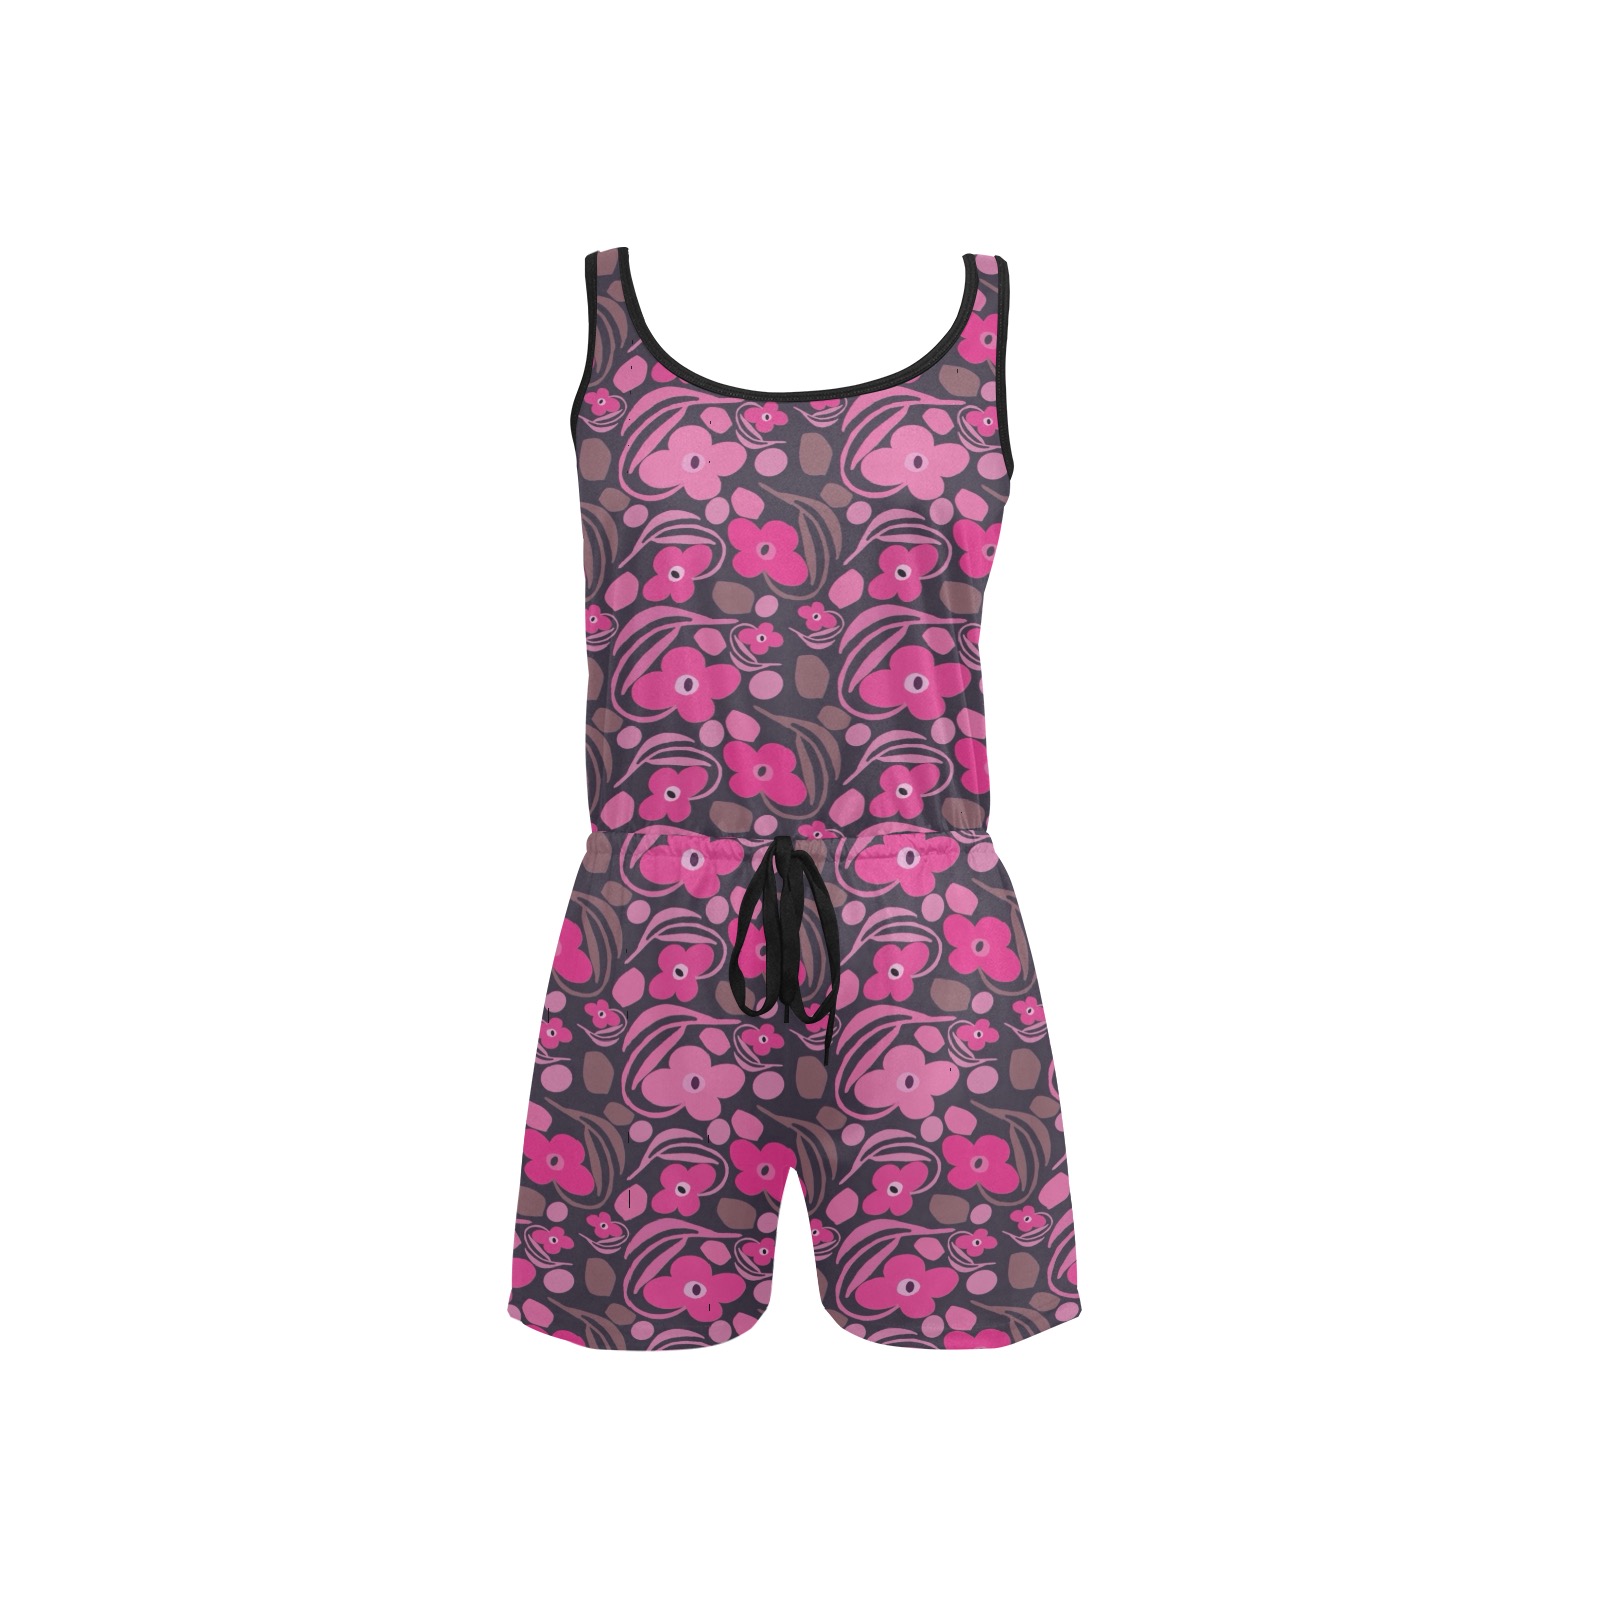 Retro pink floral All Over Print Short Jumpsuit